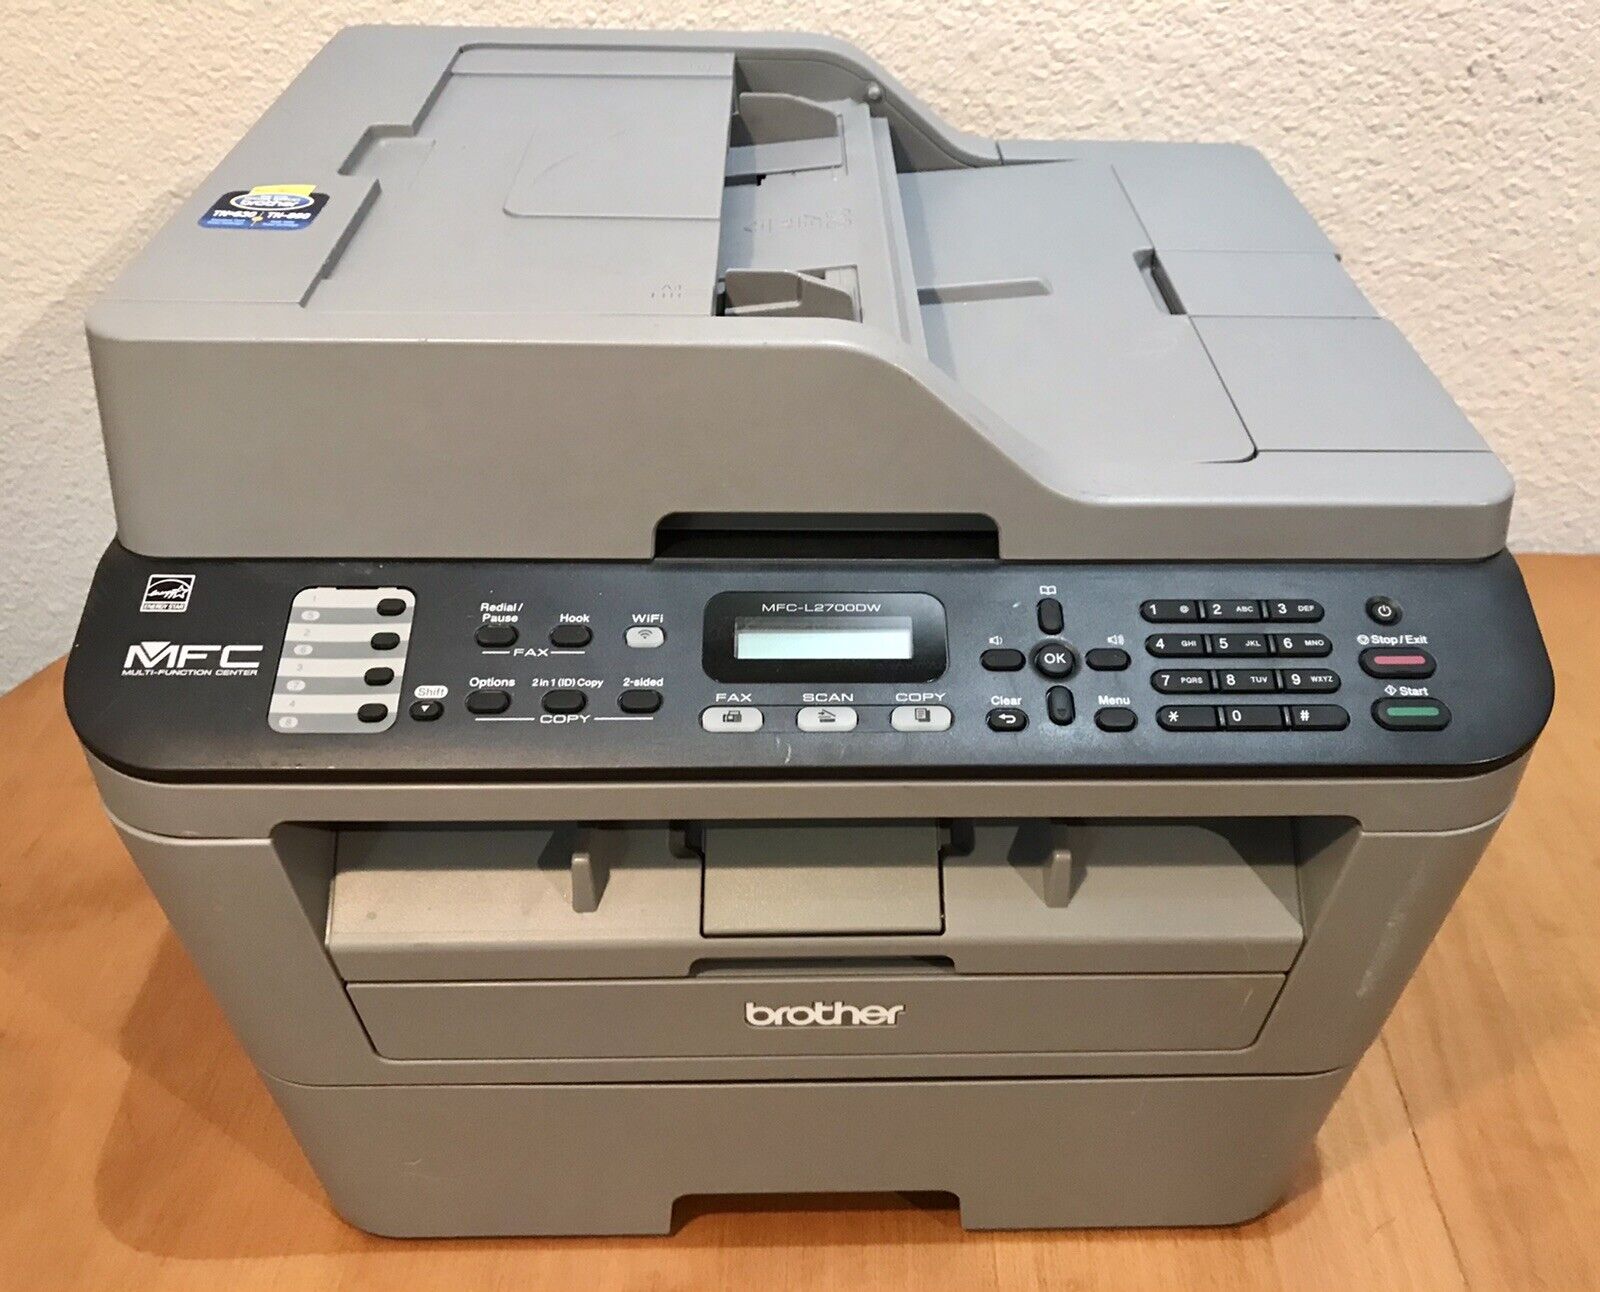 Brother Wireless MFC-L2700DW All-In-One Multi Laser Printer Copier Fax Scan WiFi